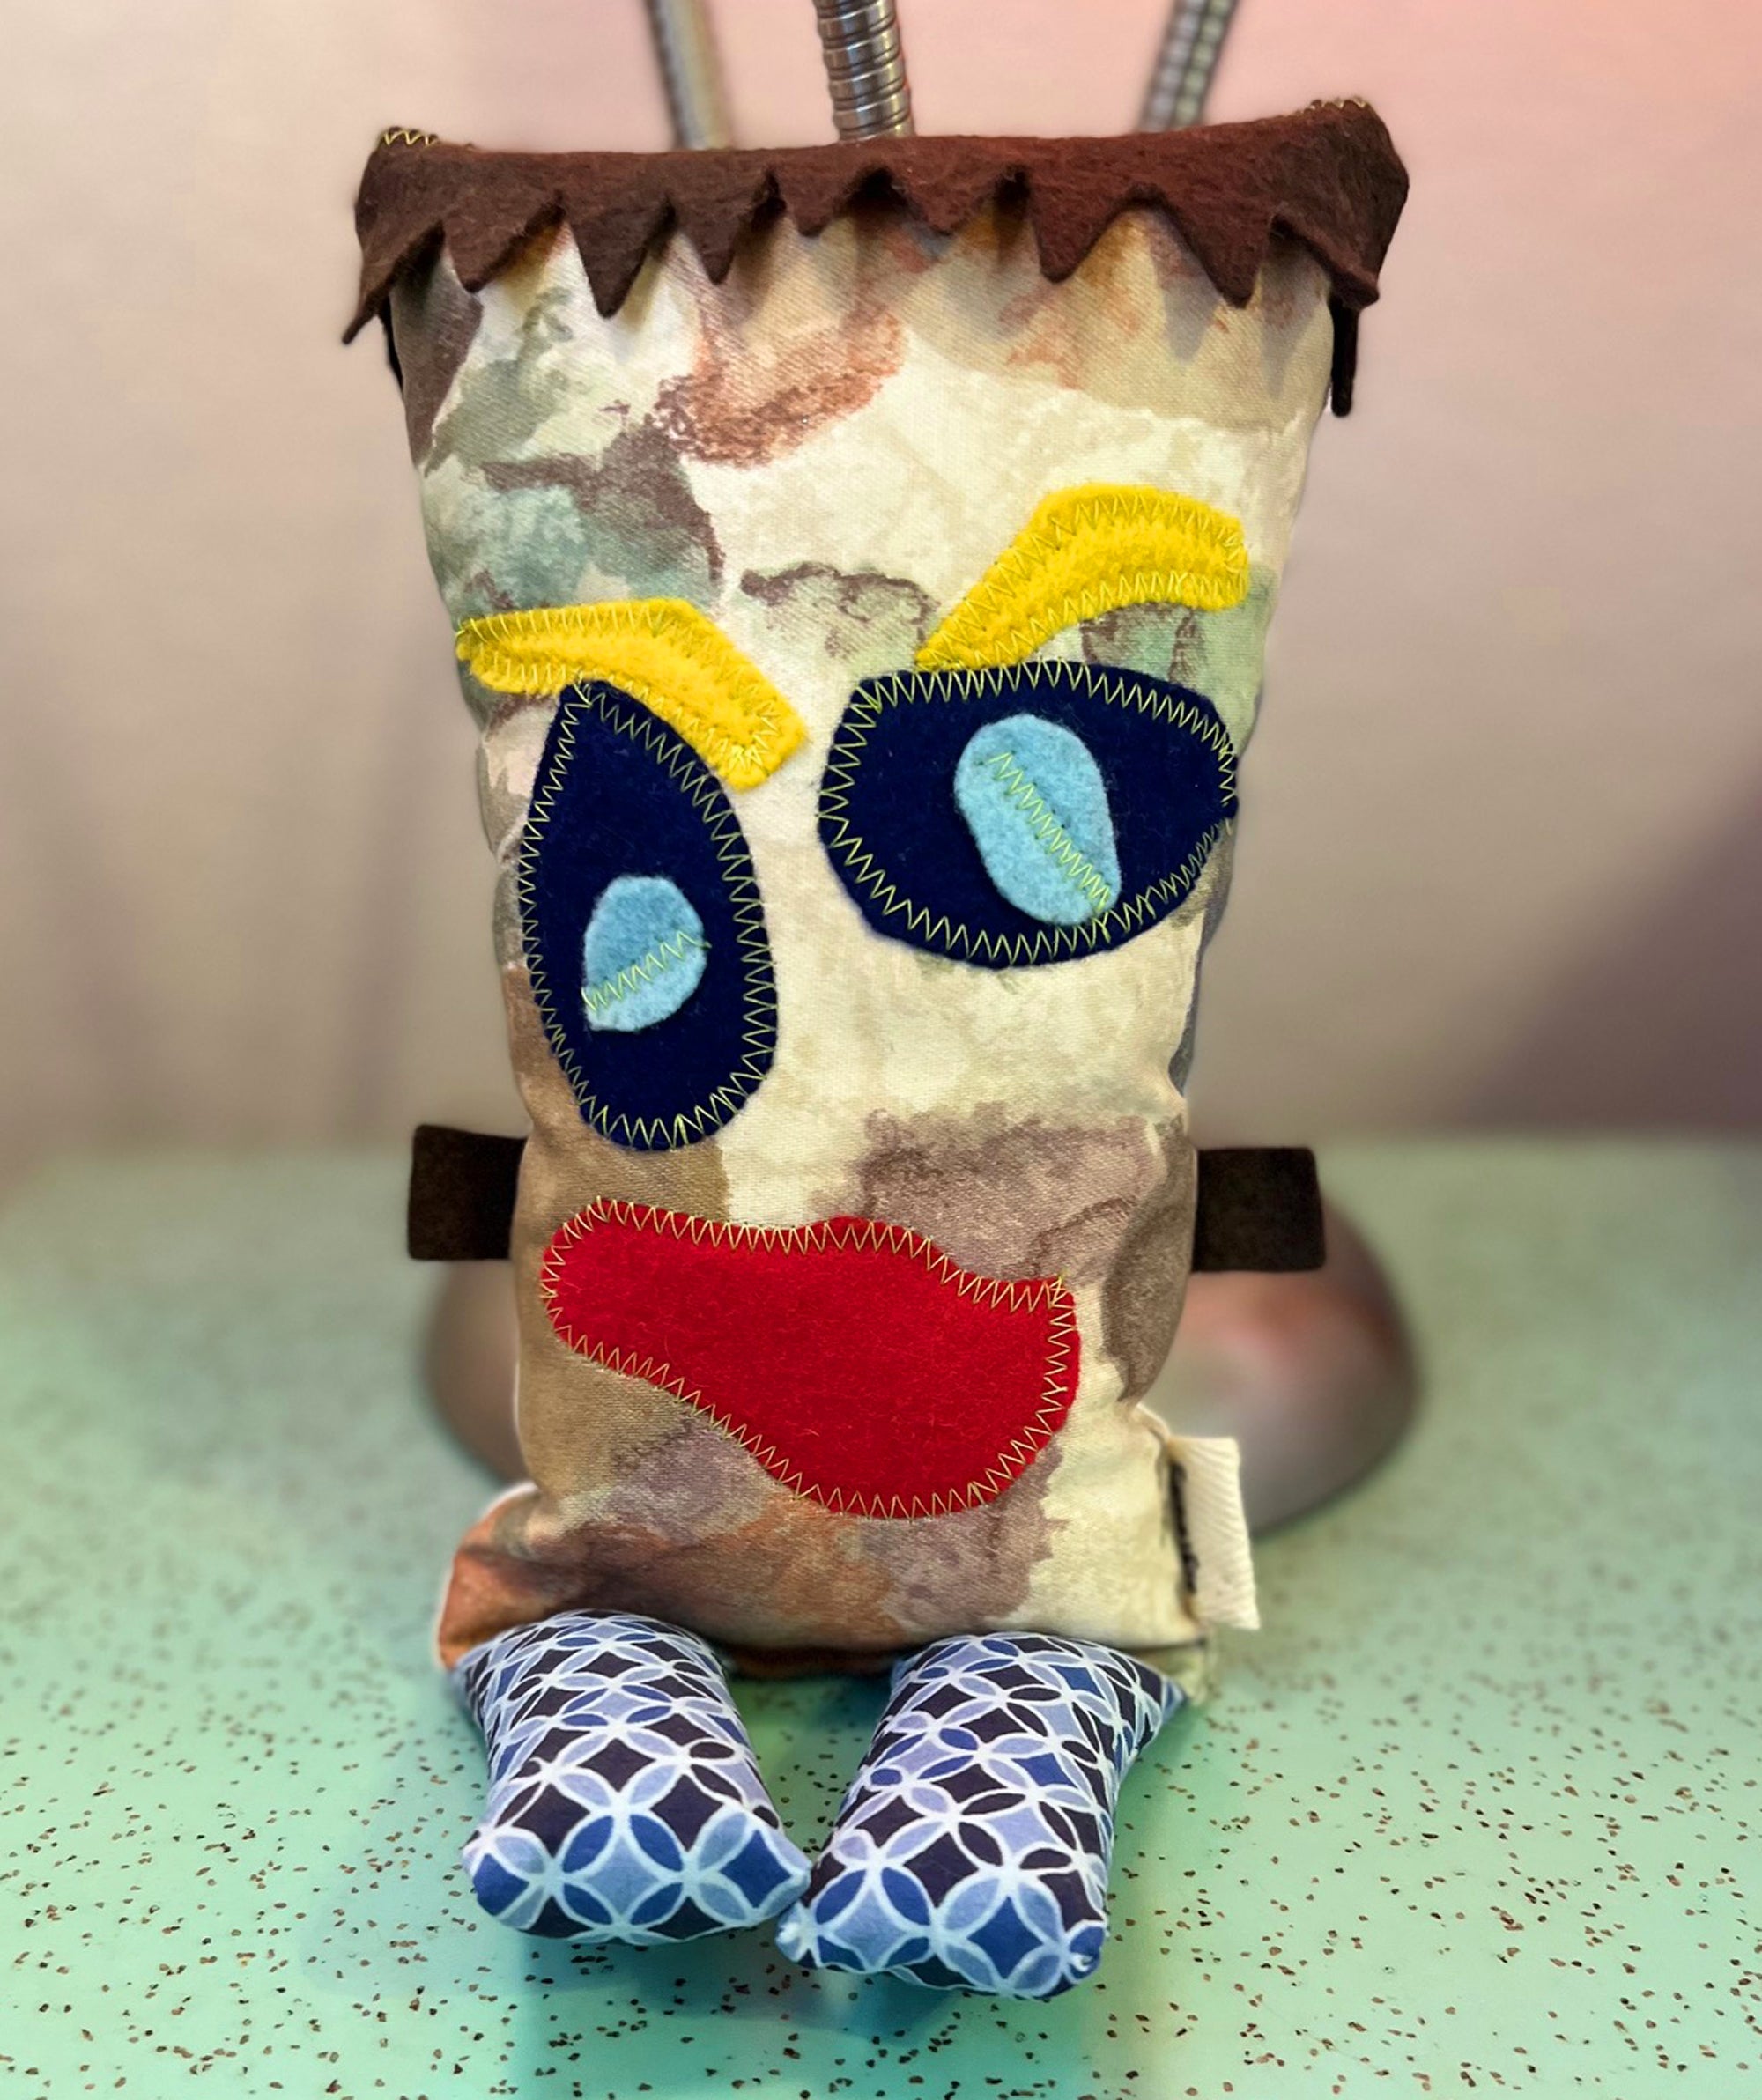 Little Monster "Fank" Handmade Recycled Fabric Plush Toy Doll